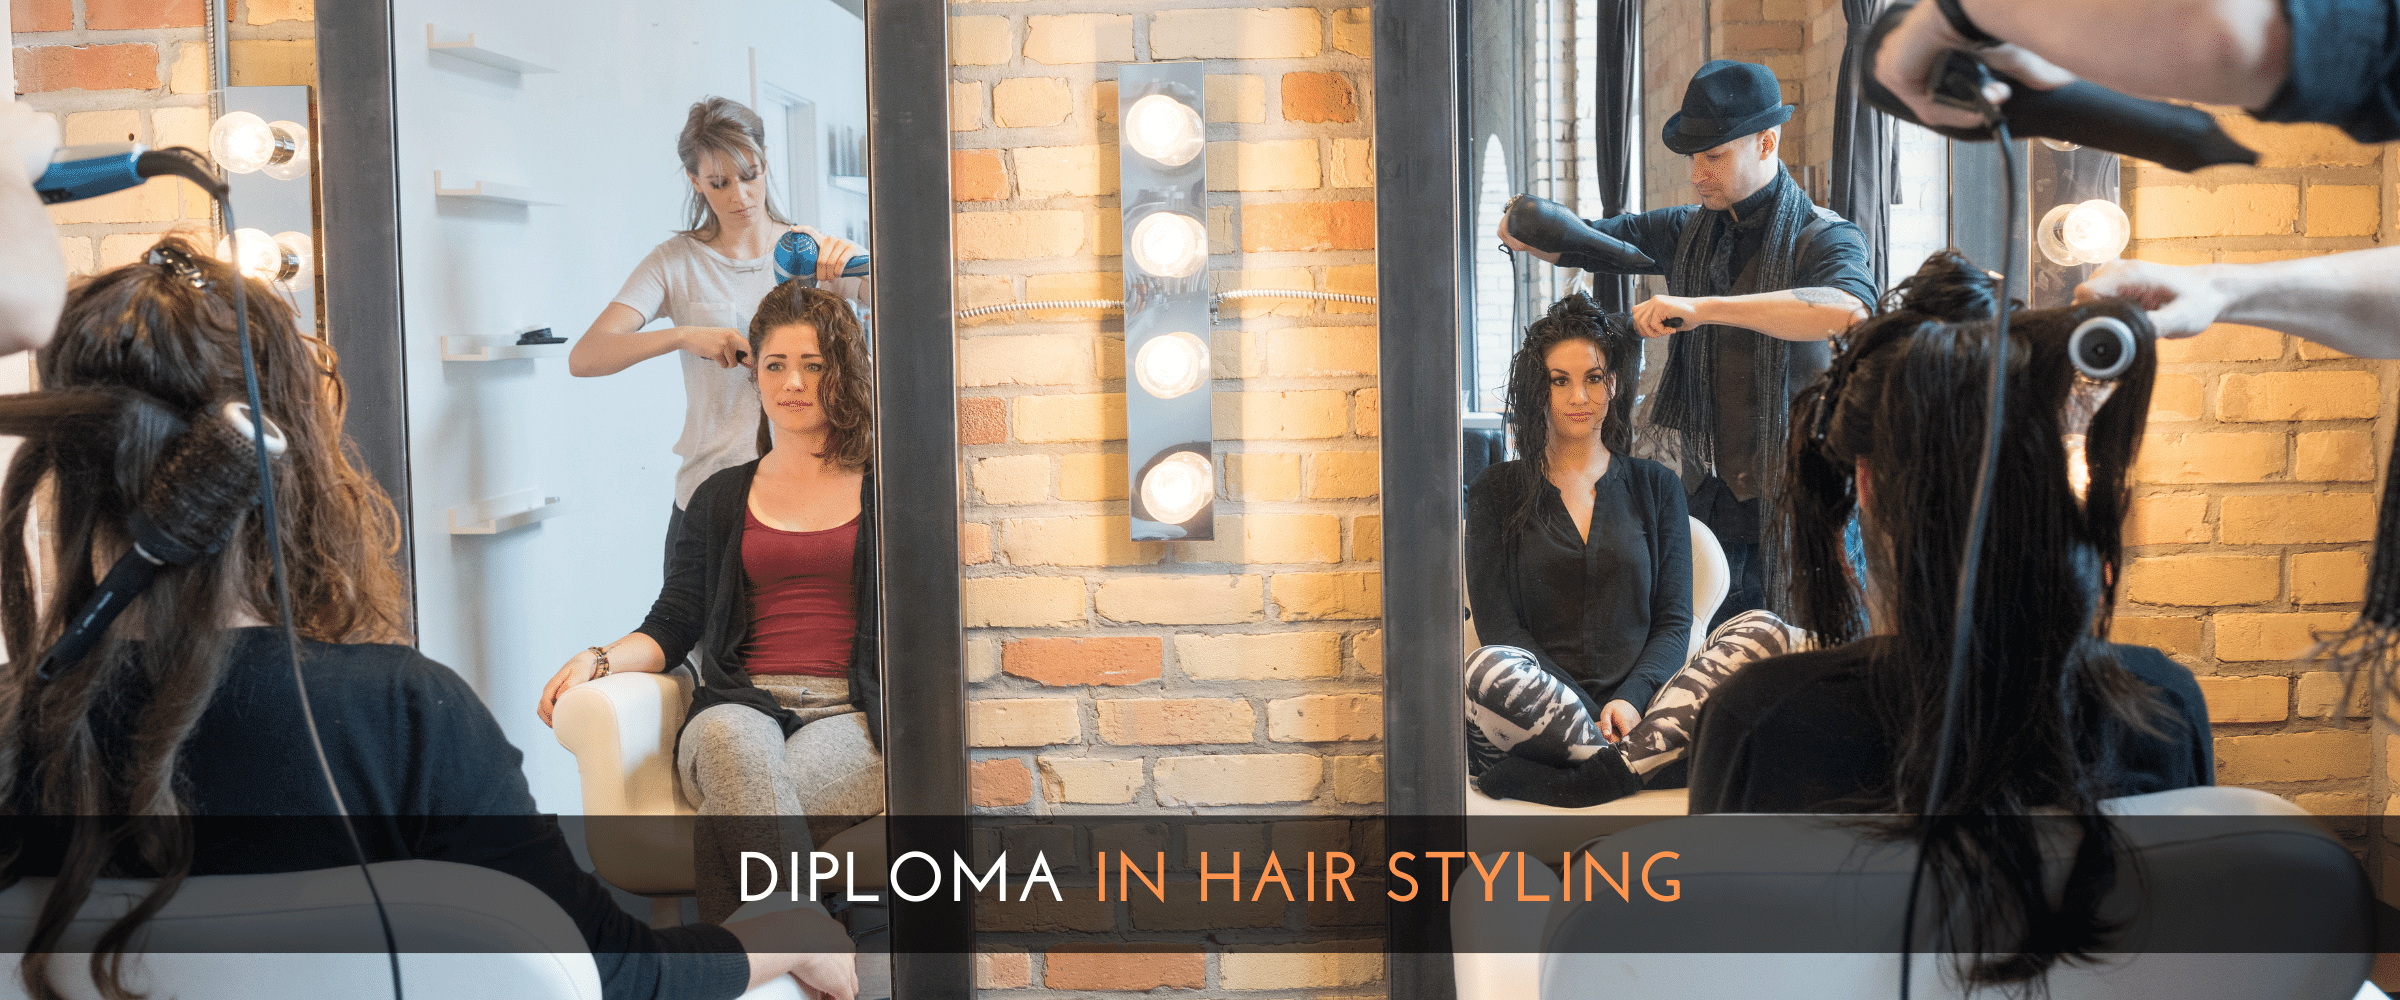 Diploma in Hair Styling